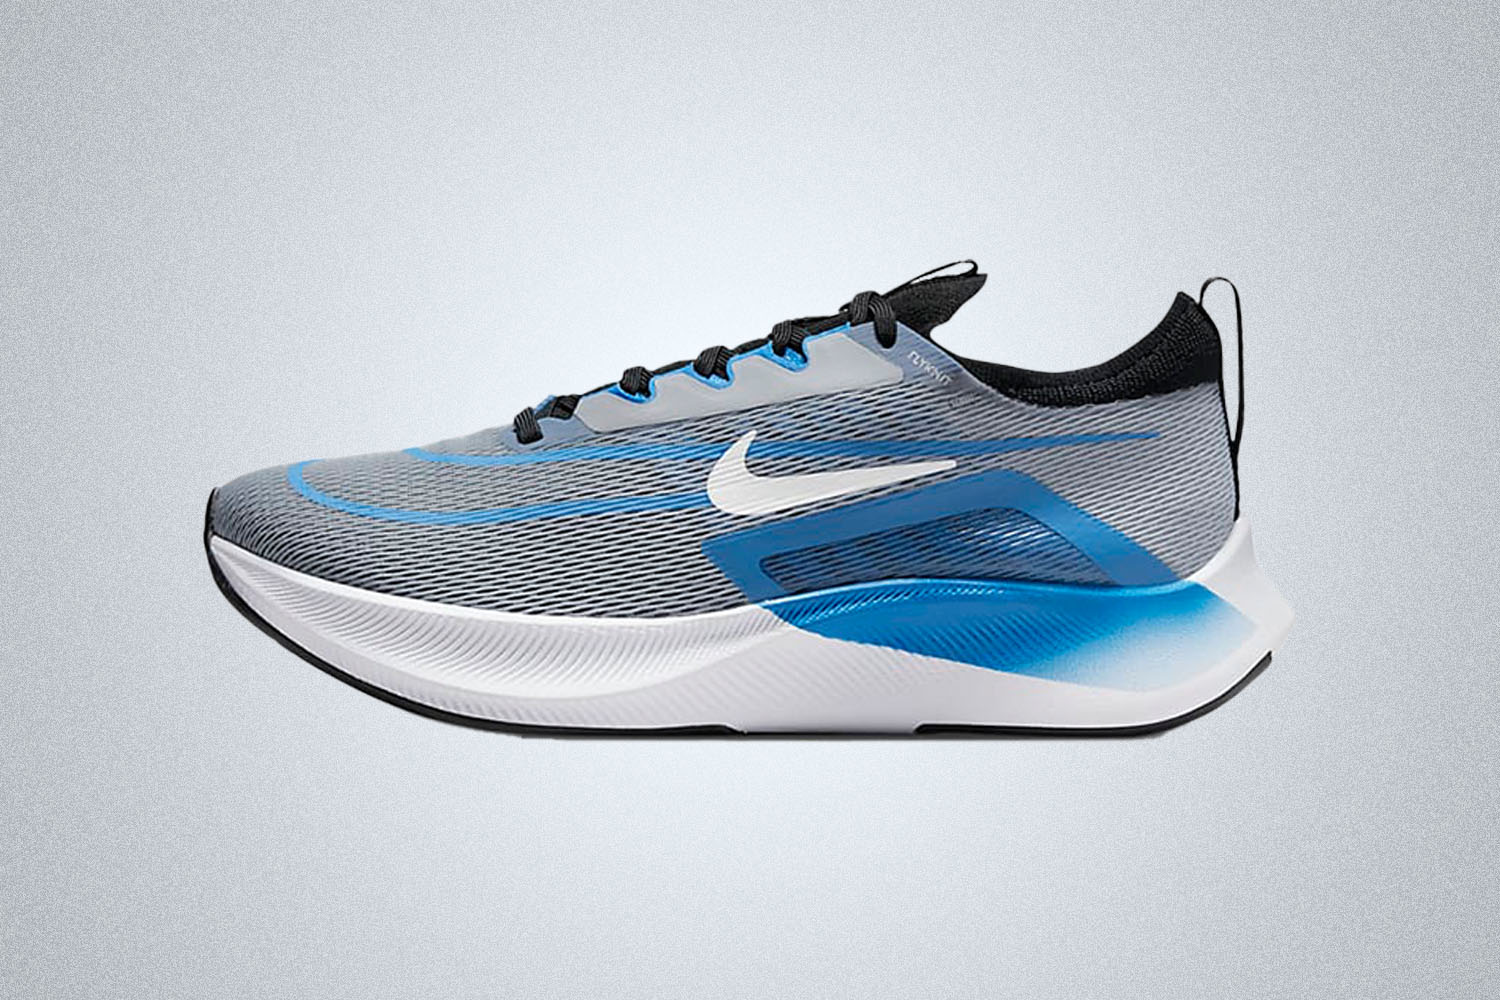 A blue and grey Nike running shoe on a grey background